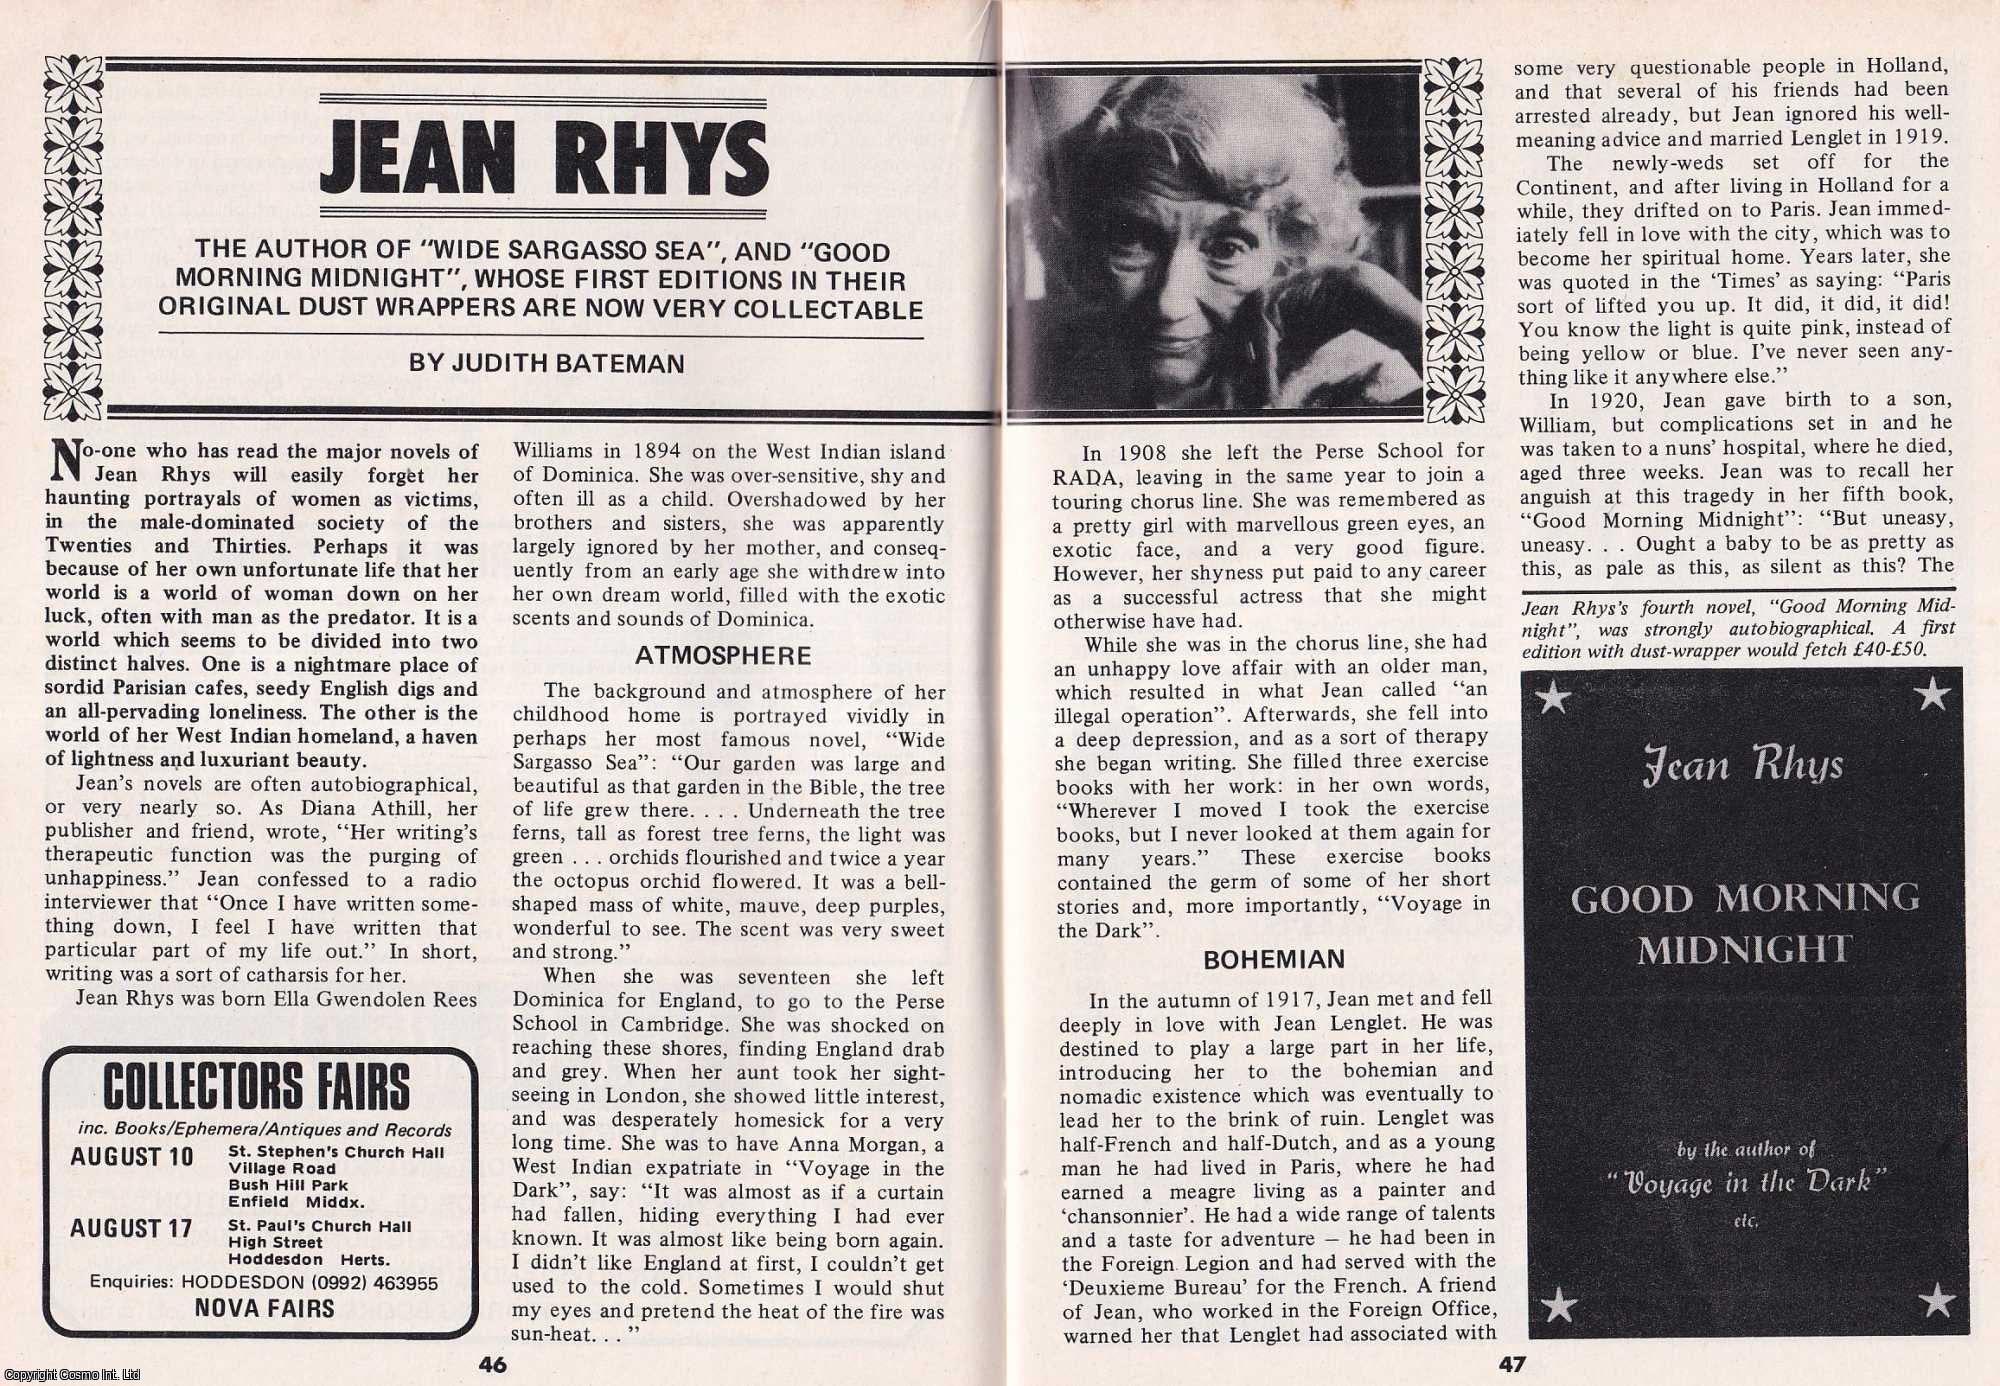 Judith Bateman - Jean Rhys. The Author of Wide Sargasso Sea. This is an original article separated from an issue of The Book & Magazine Collector publication.